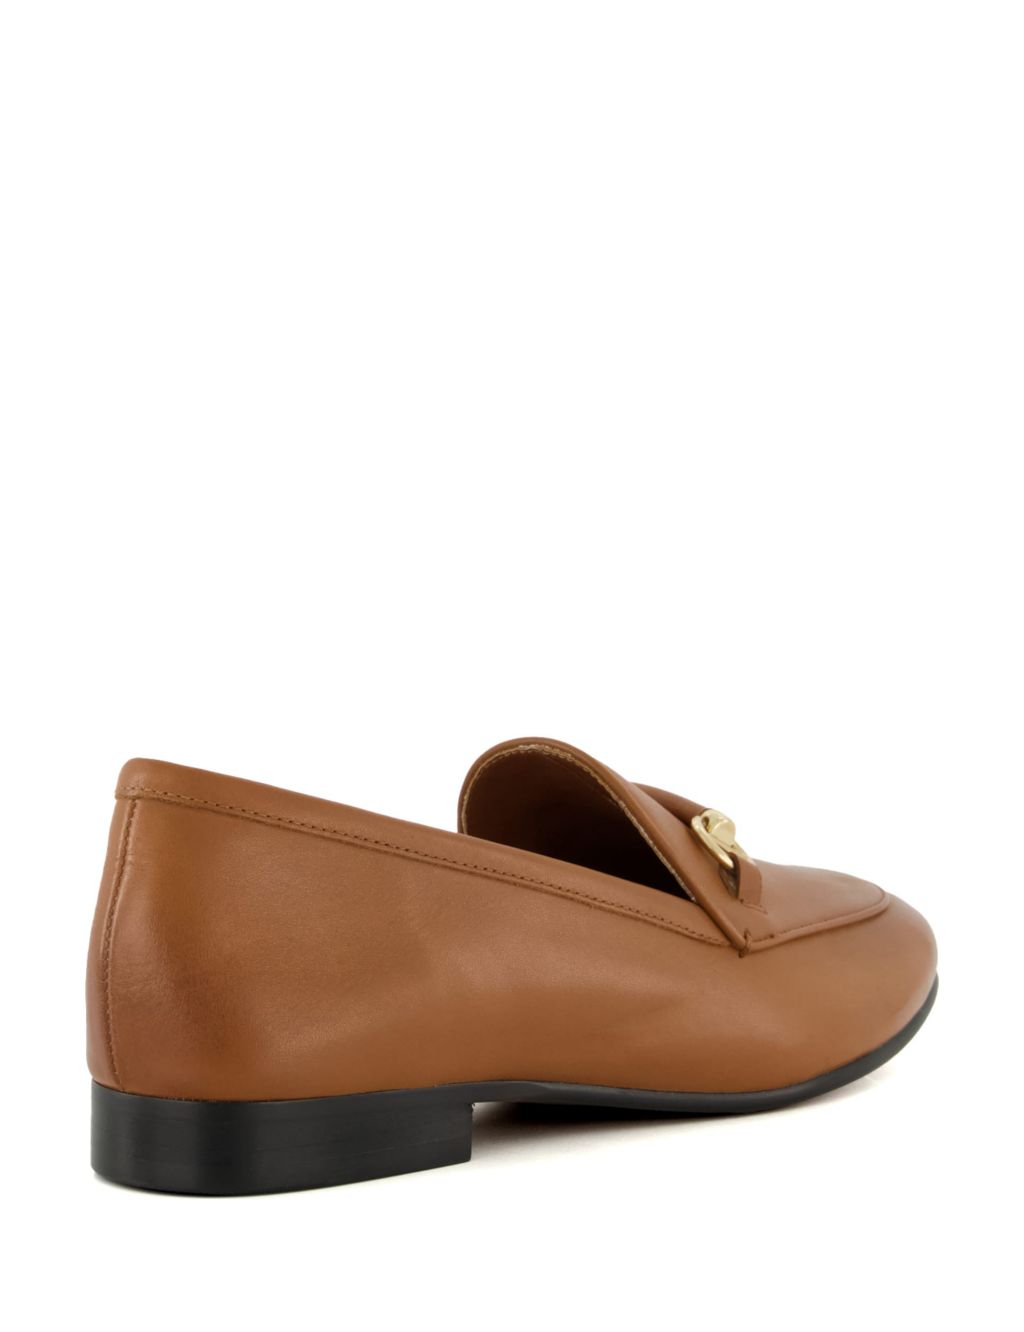 Leather Bar Trim Flat Loafers 4 of 5